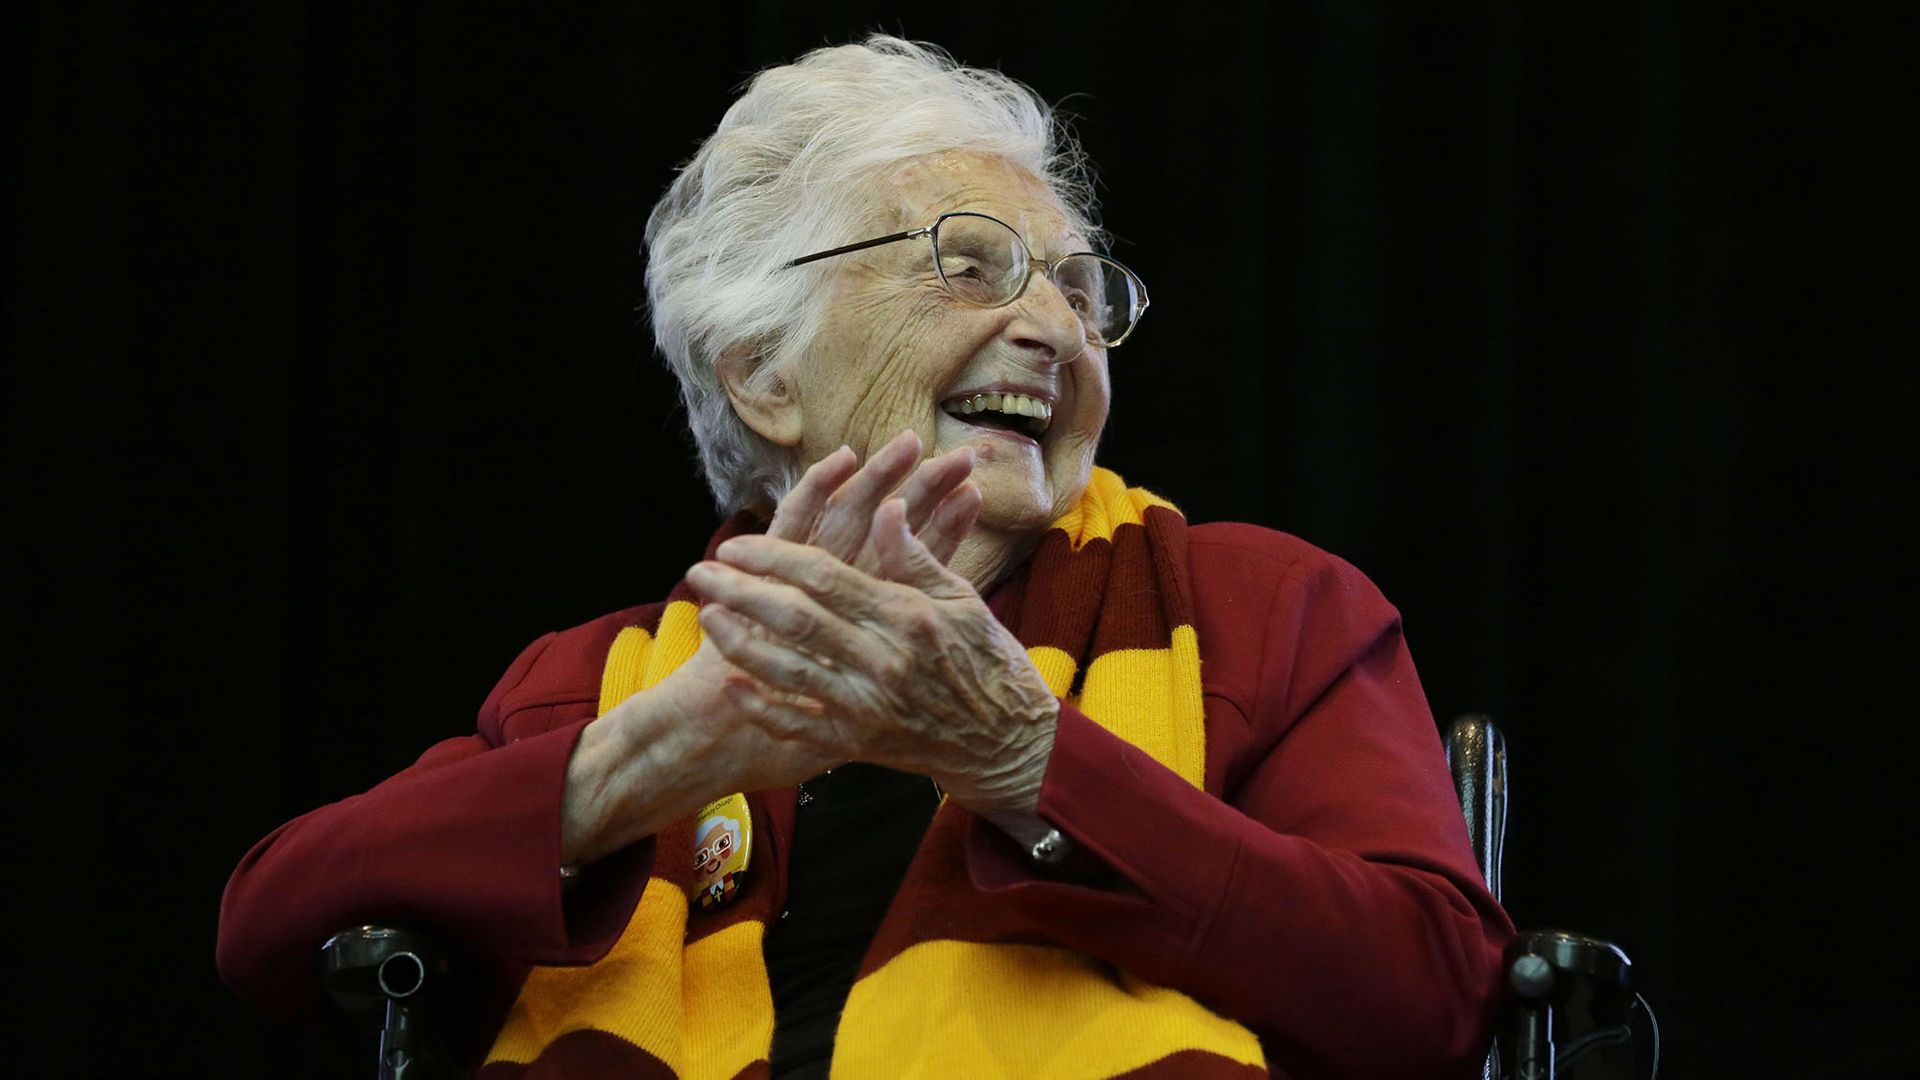 Loyola Chicago basketball super fan Sister Jean claps her hands.